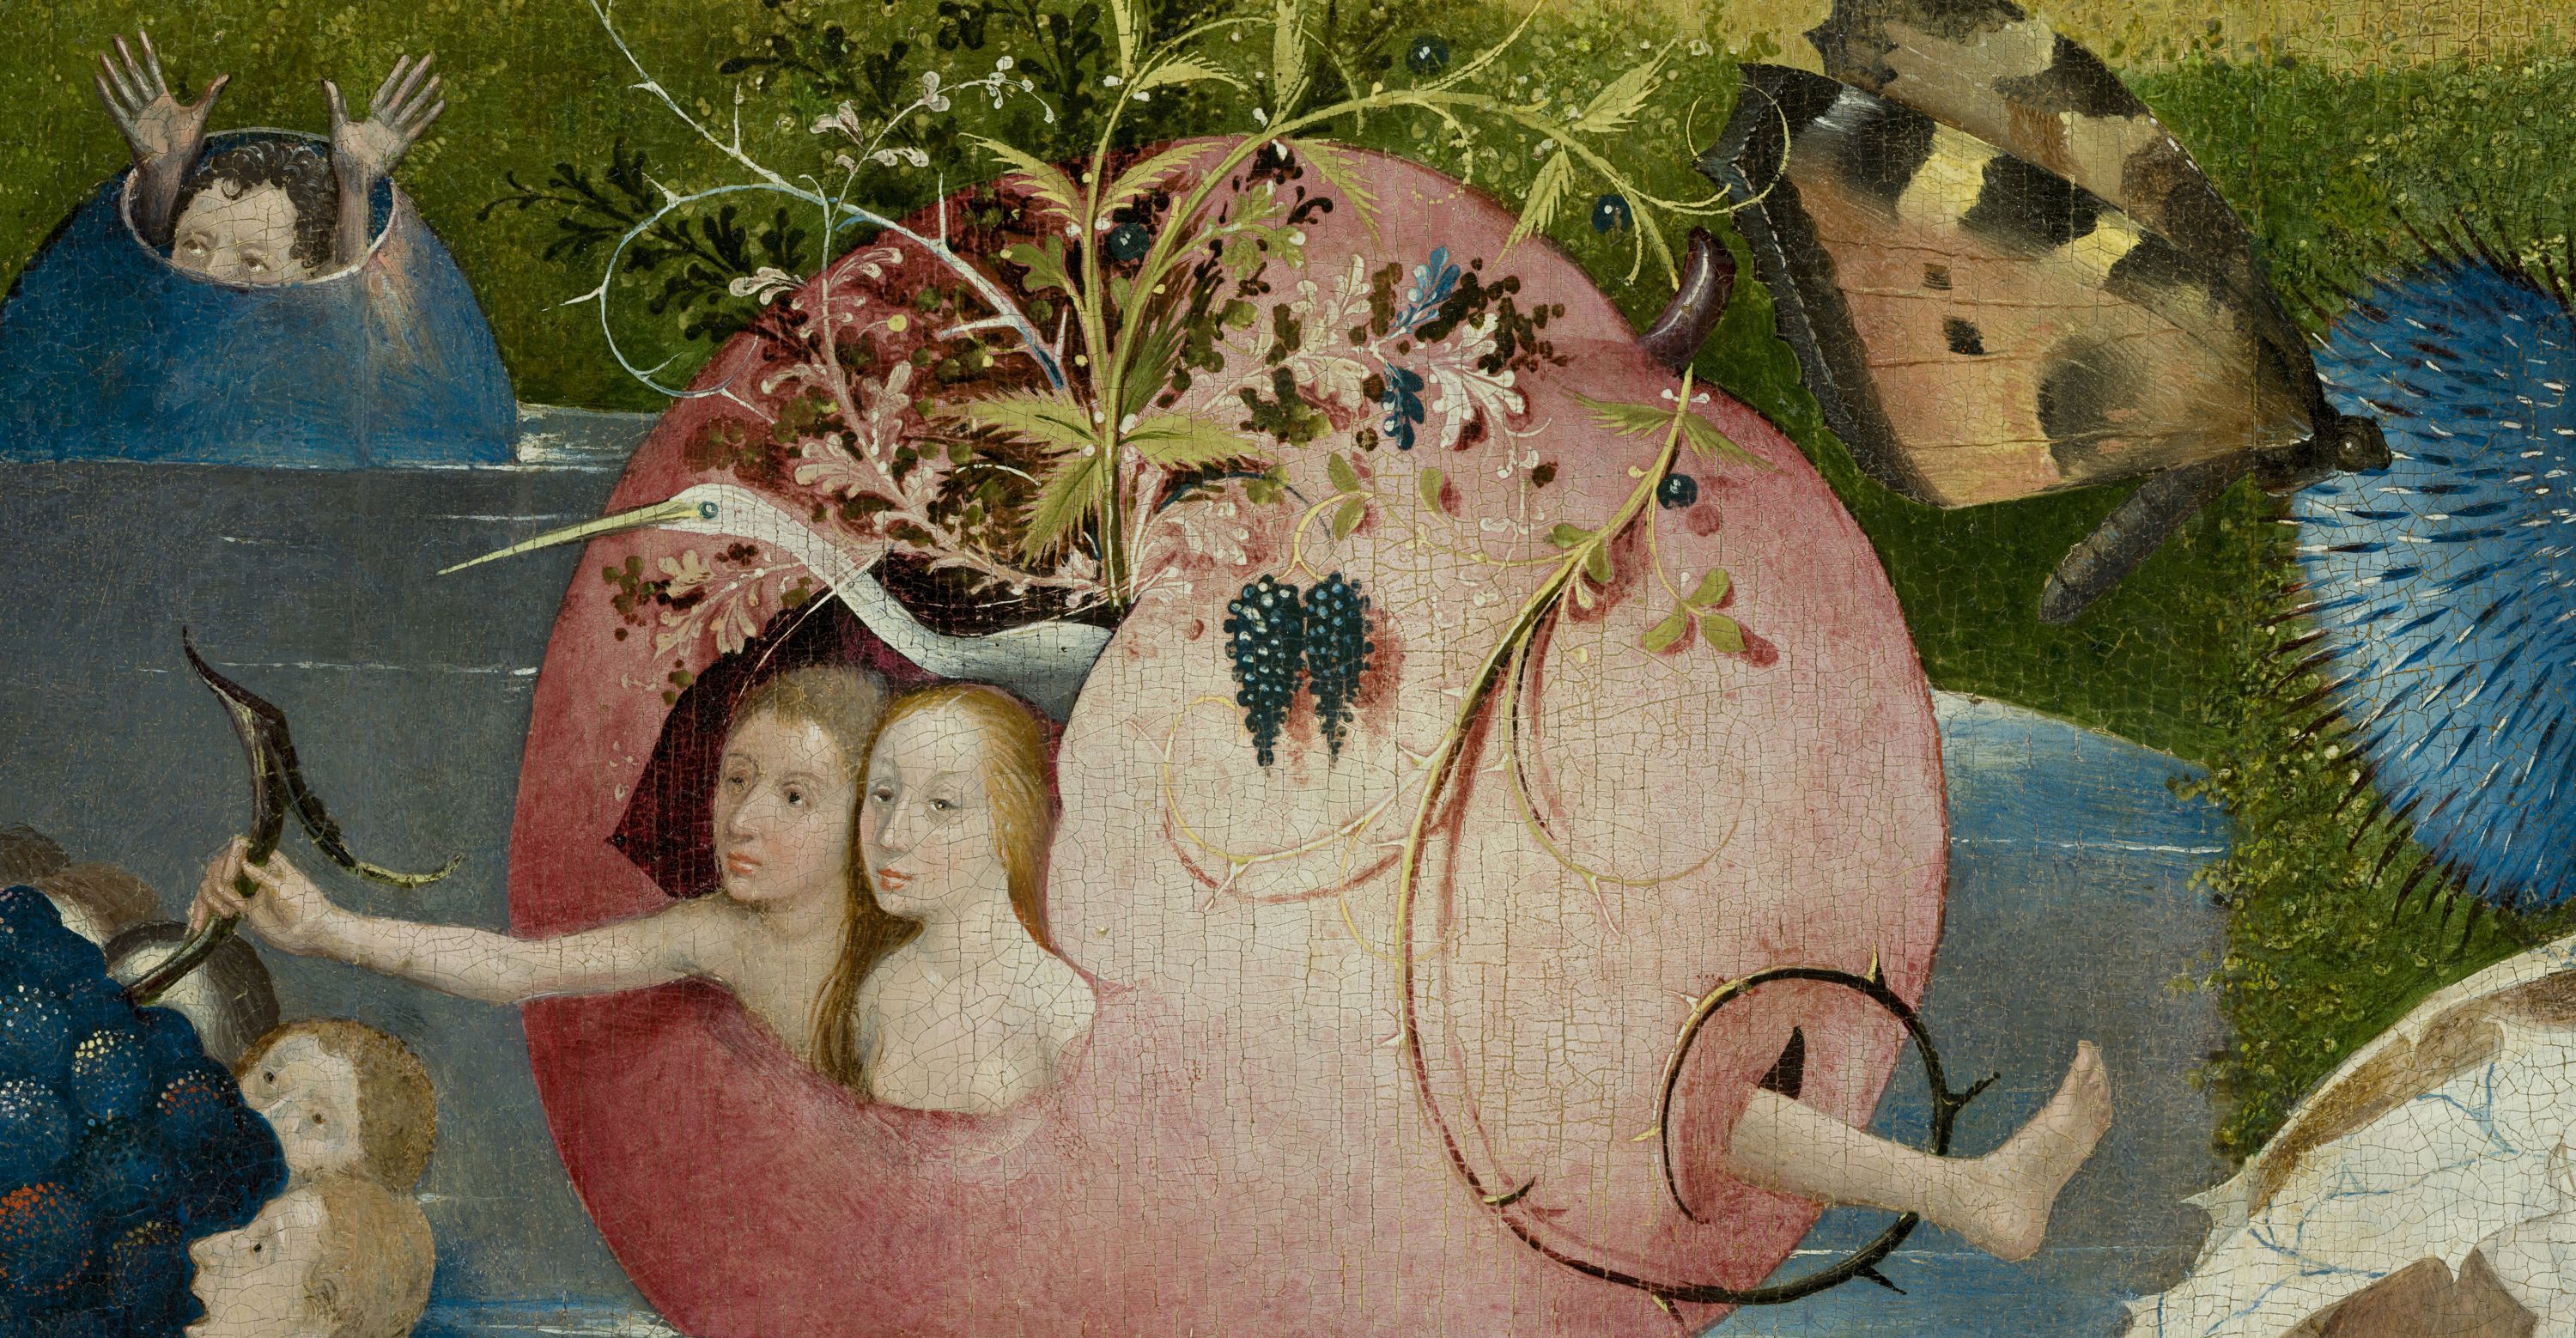 Painting - The Garden of Earthly Delights, Detail by Hieronymus Bosch (1490)